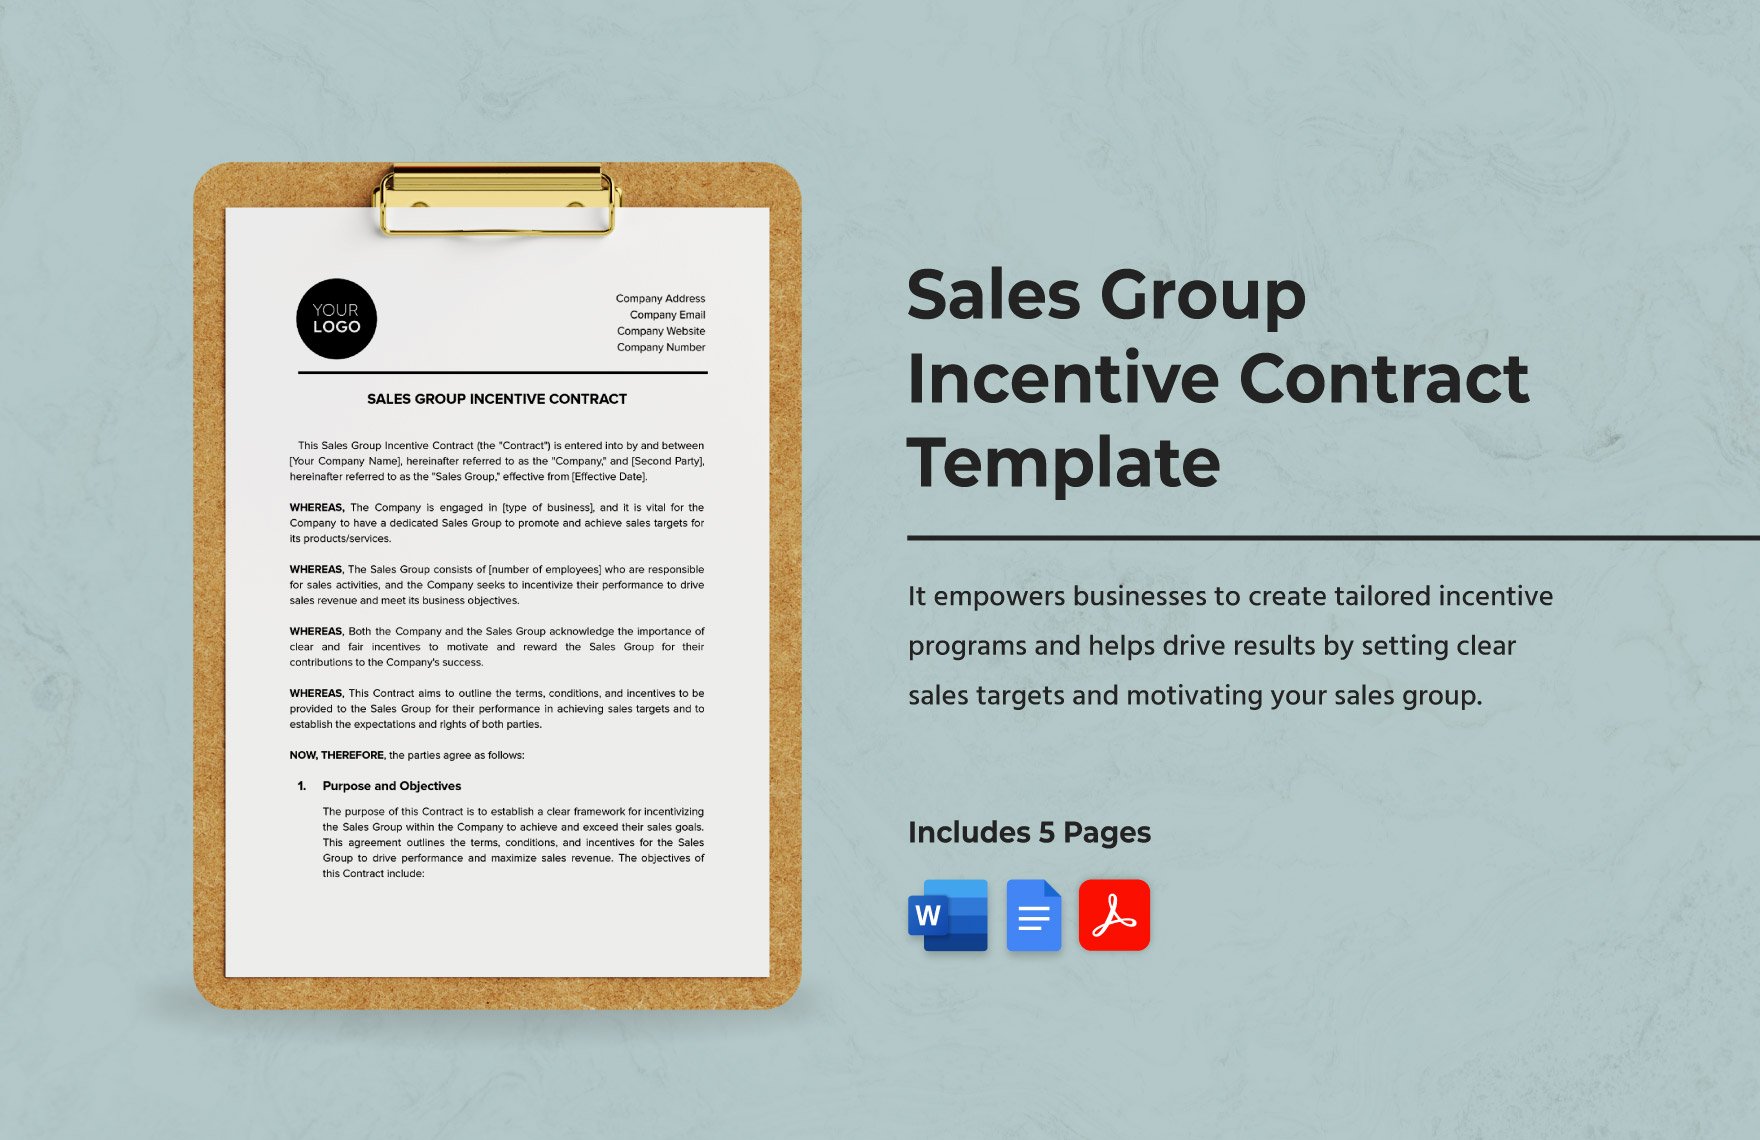 Sales Group Incentive Contract Template